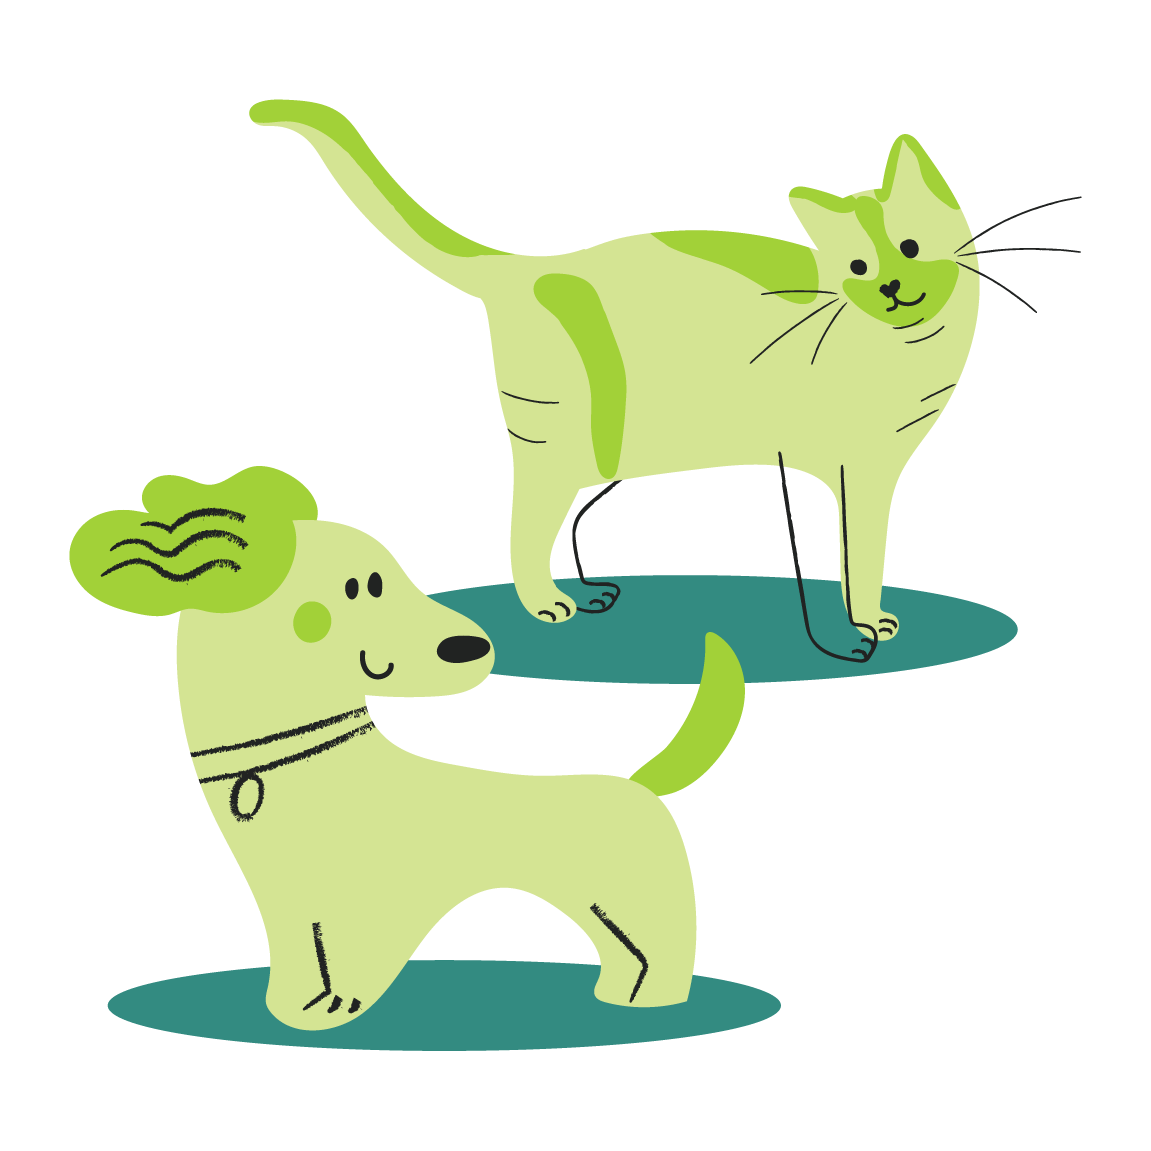 Drawn lime green cat with darker green hightlights smiling at drawn lime green dog with darker green tail and hears.